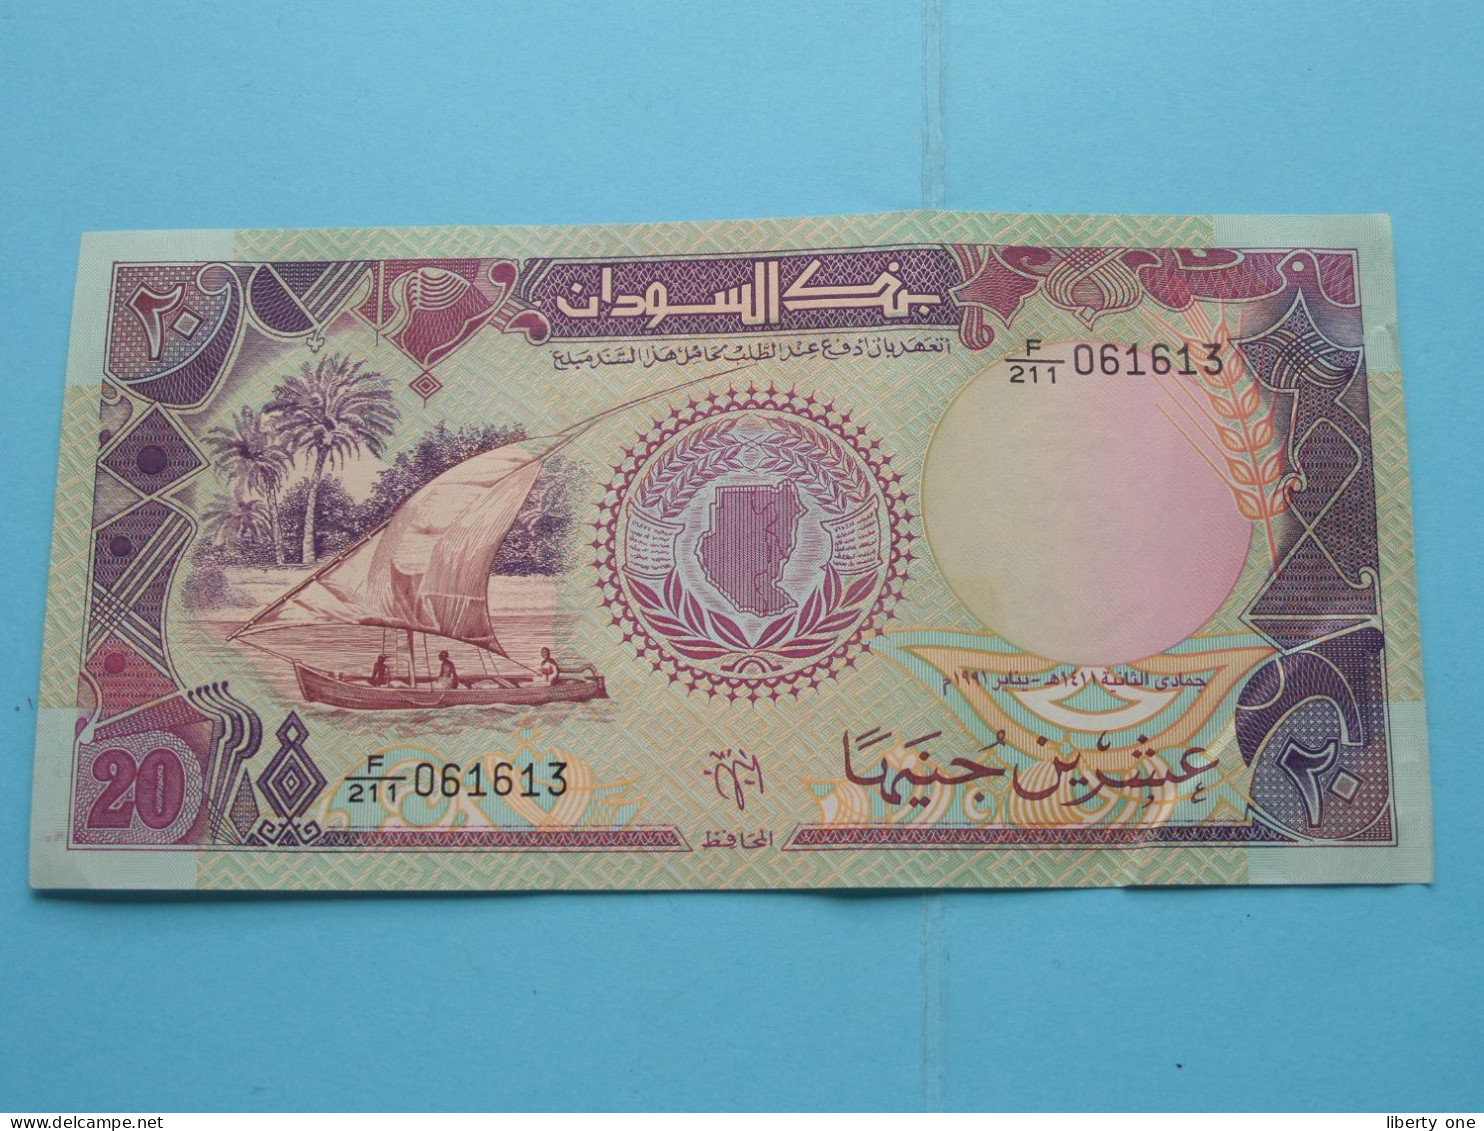 20 Sudanese Pounds ( F/211 061613 ) Bank Of SUDAN () 1991 ( For Grade See SCAN ) XF ! - Soudan